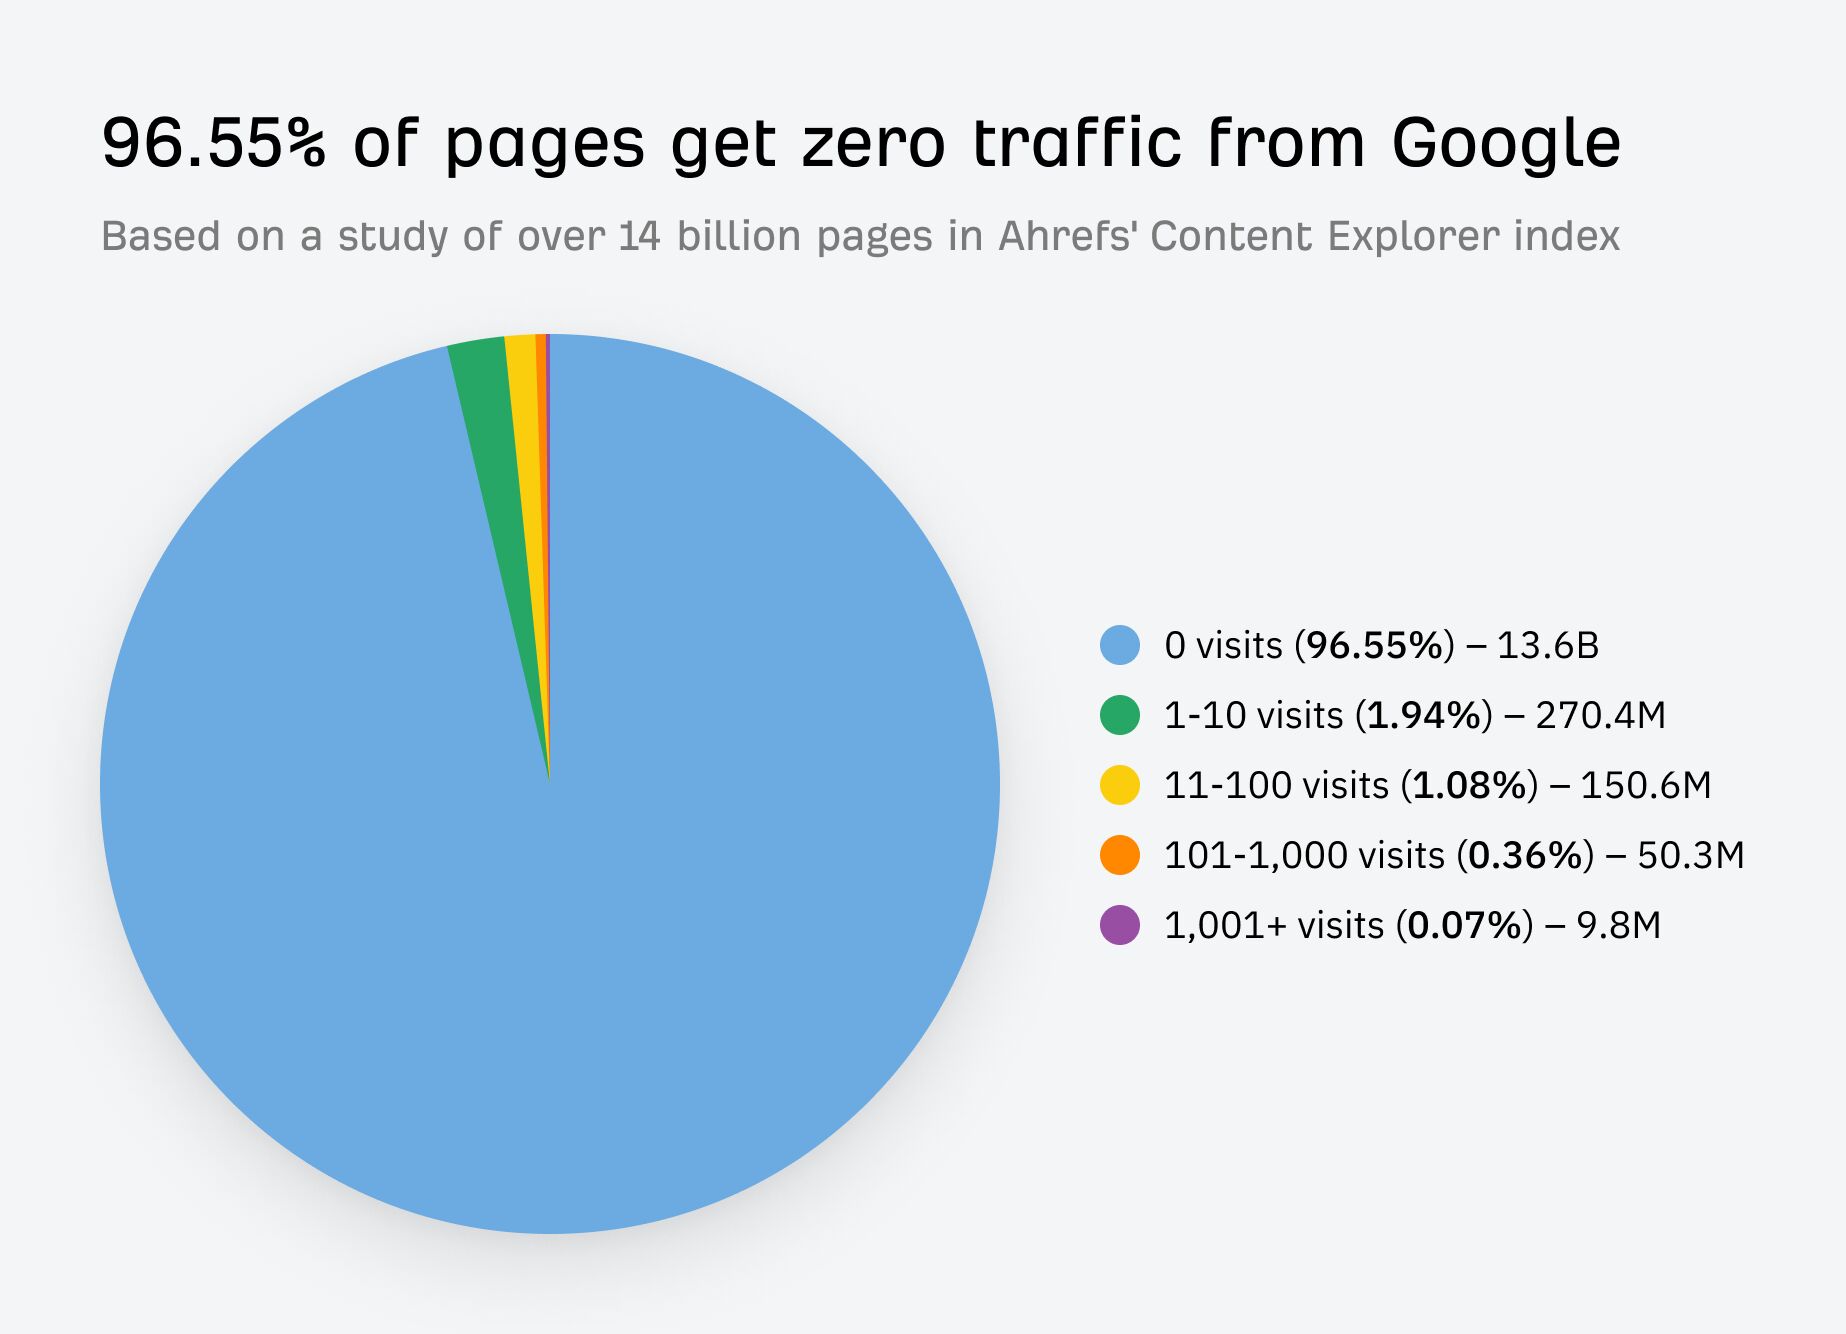 Pie chart showing 96.55% of pages get zero traffic from Google